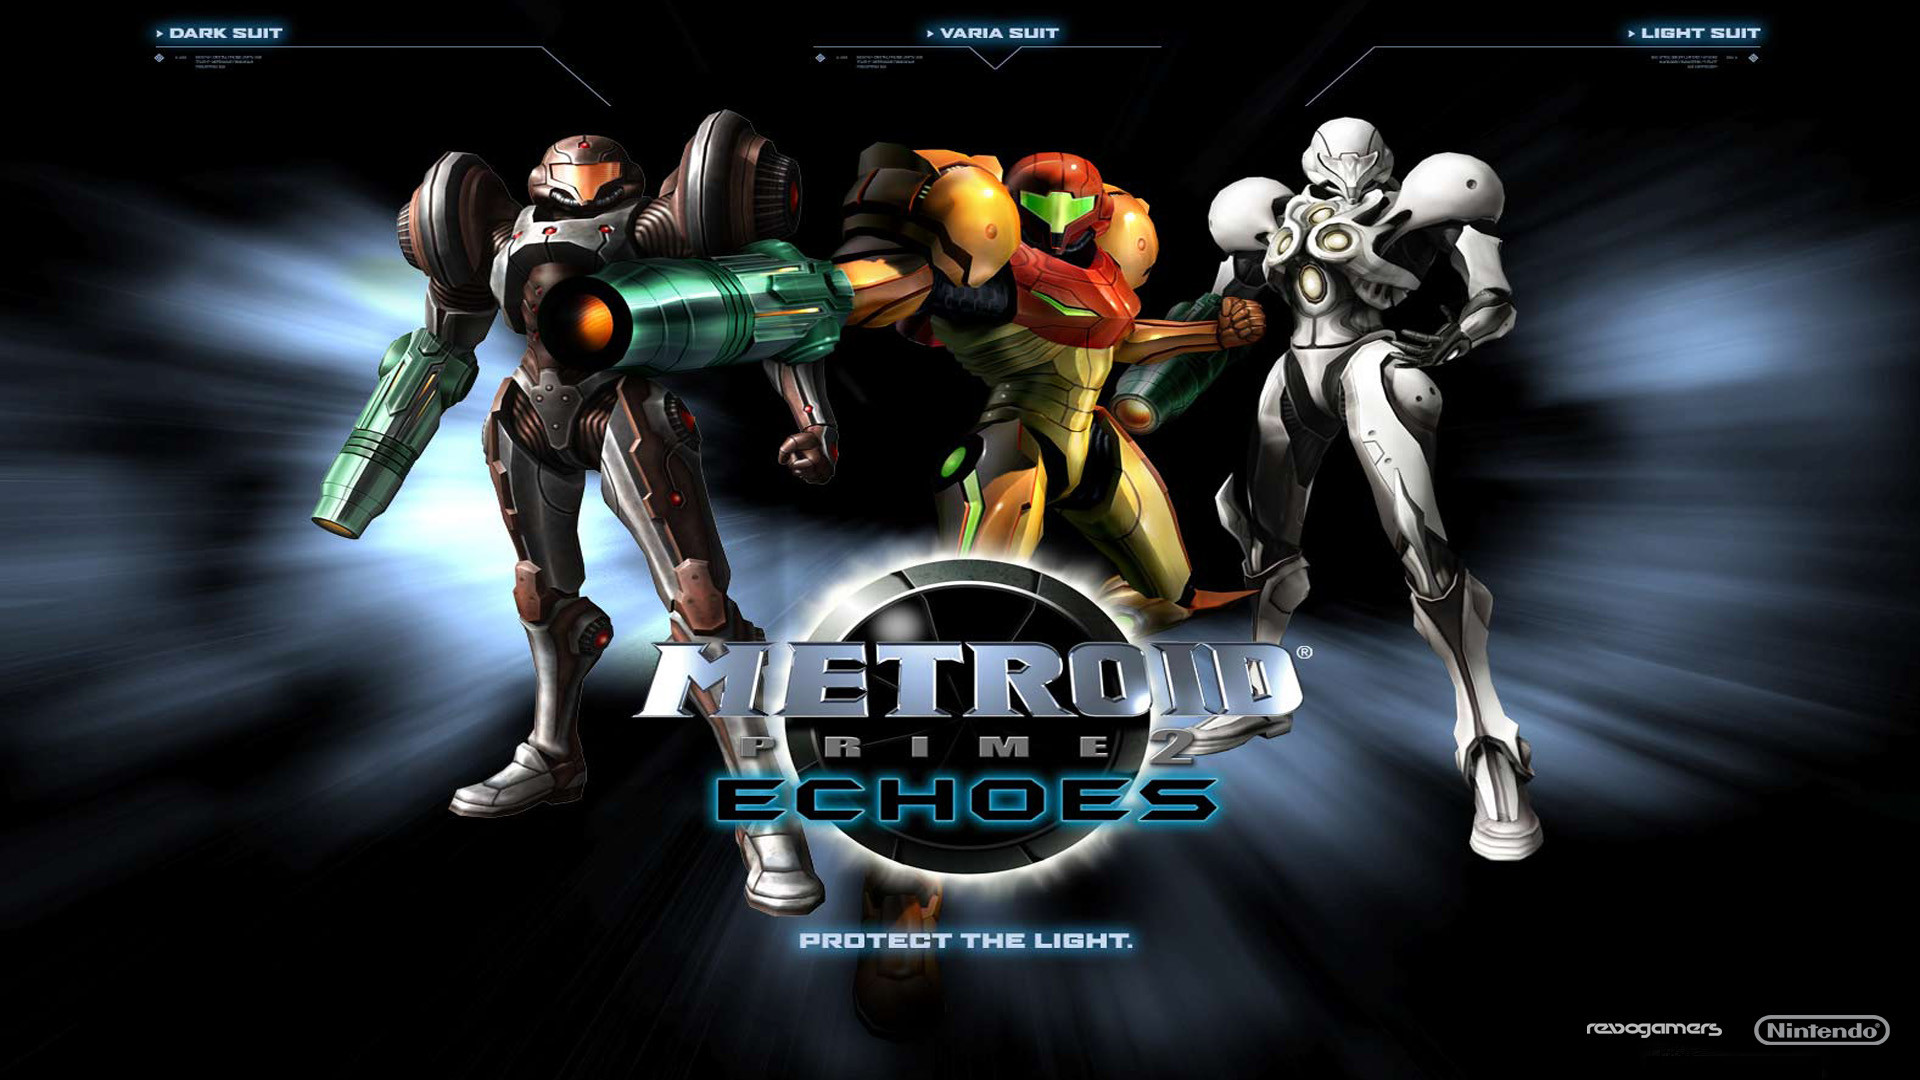 1920x1080 2 Metroid Prime 2: Echoes HD Wallpapers | Backgrounds - Wallpaper Abyss